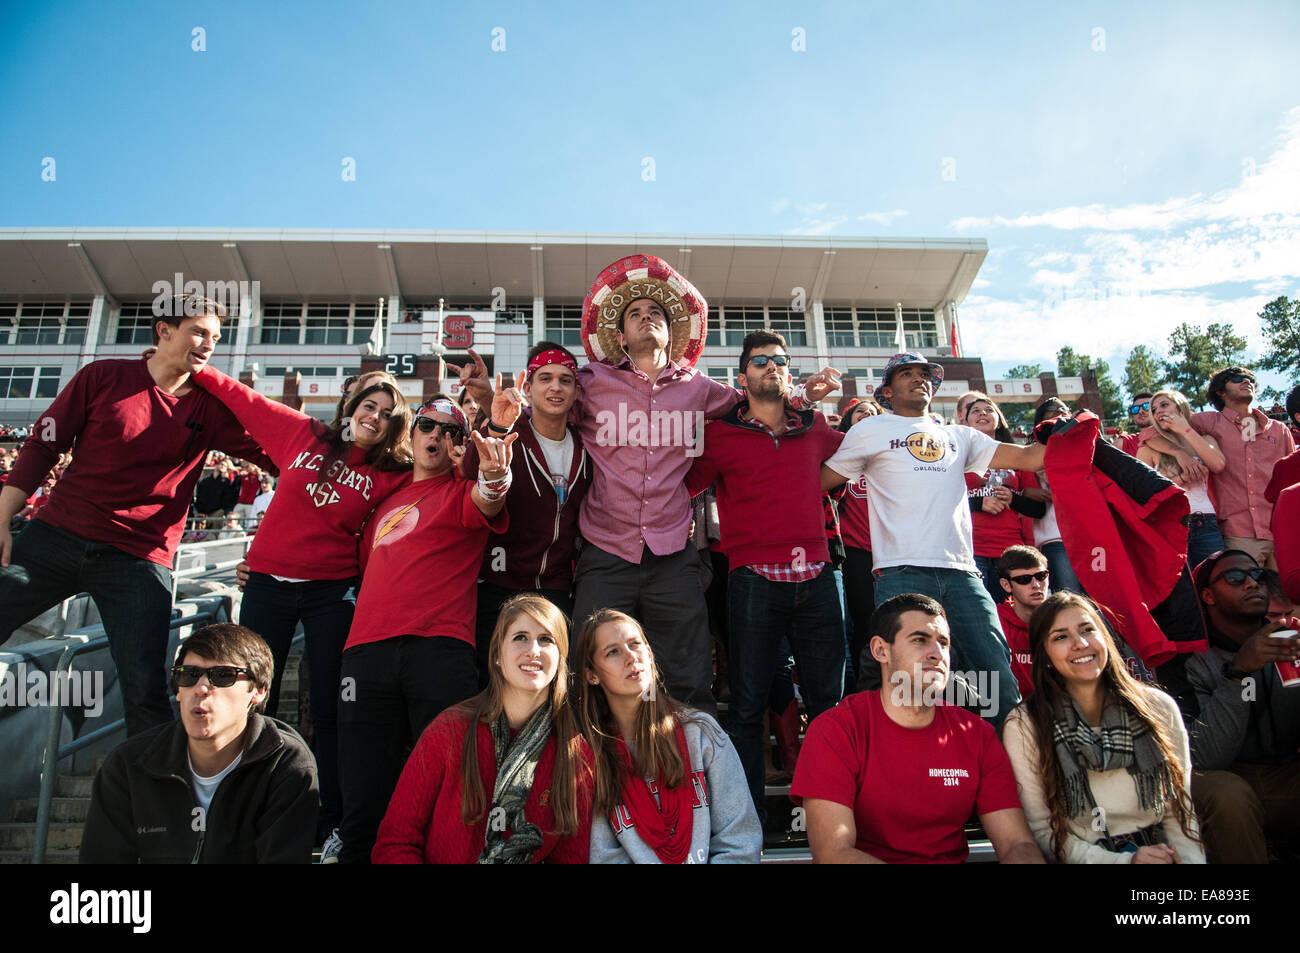 Raleigh, North Carolina, US. 8th Nov, 2014. Nov. 8, 2014 - Raleigh, N.C., USA - North Carolina State Wolfpack fans show their spirit during Saturday's game against the Georgia Tech Yellow Jackets. The Yellow Jackets defeated the Wolfpack, 56-23. Credit:  Timothy L. Hale/ZUMA Wire/ZUMAPRESS.com/Alamy Live News Stock Photo